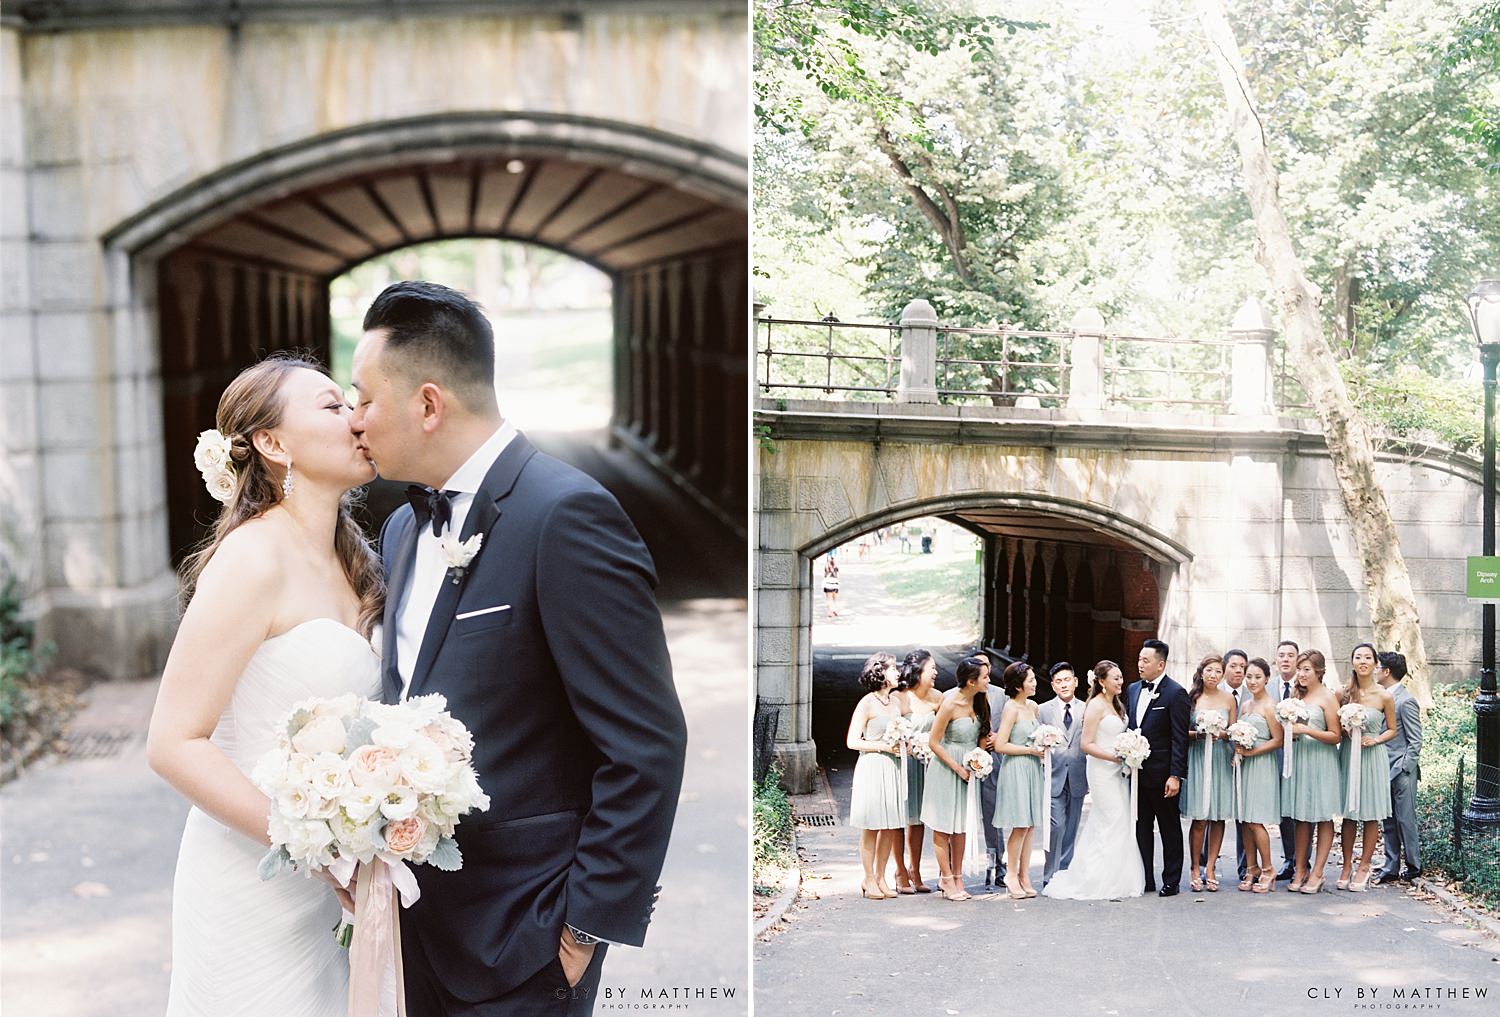 Bride and groom portraits at Central Park in NYC via Jubilee Events